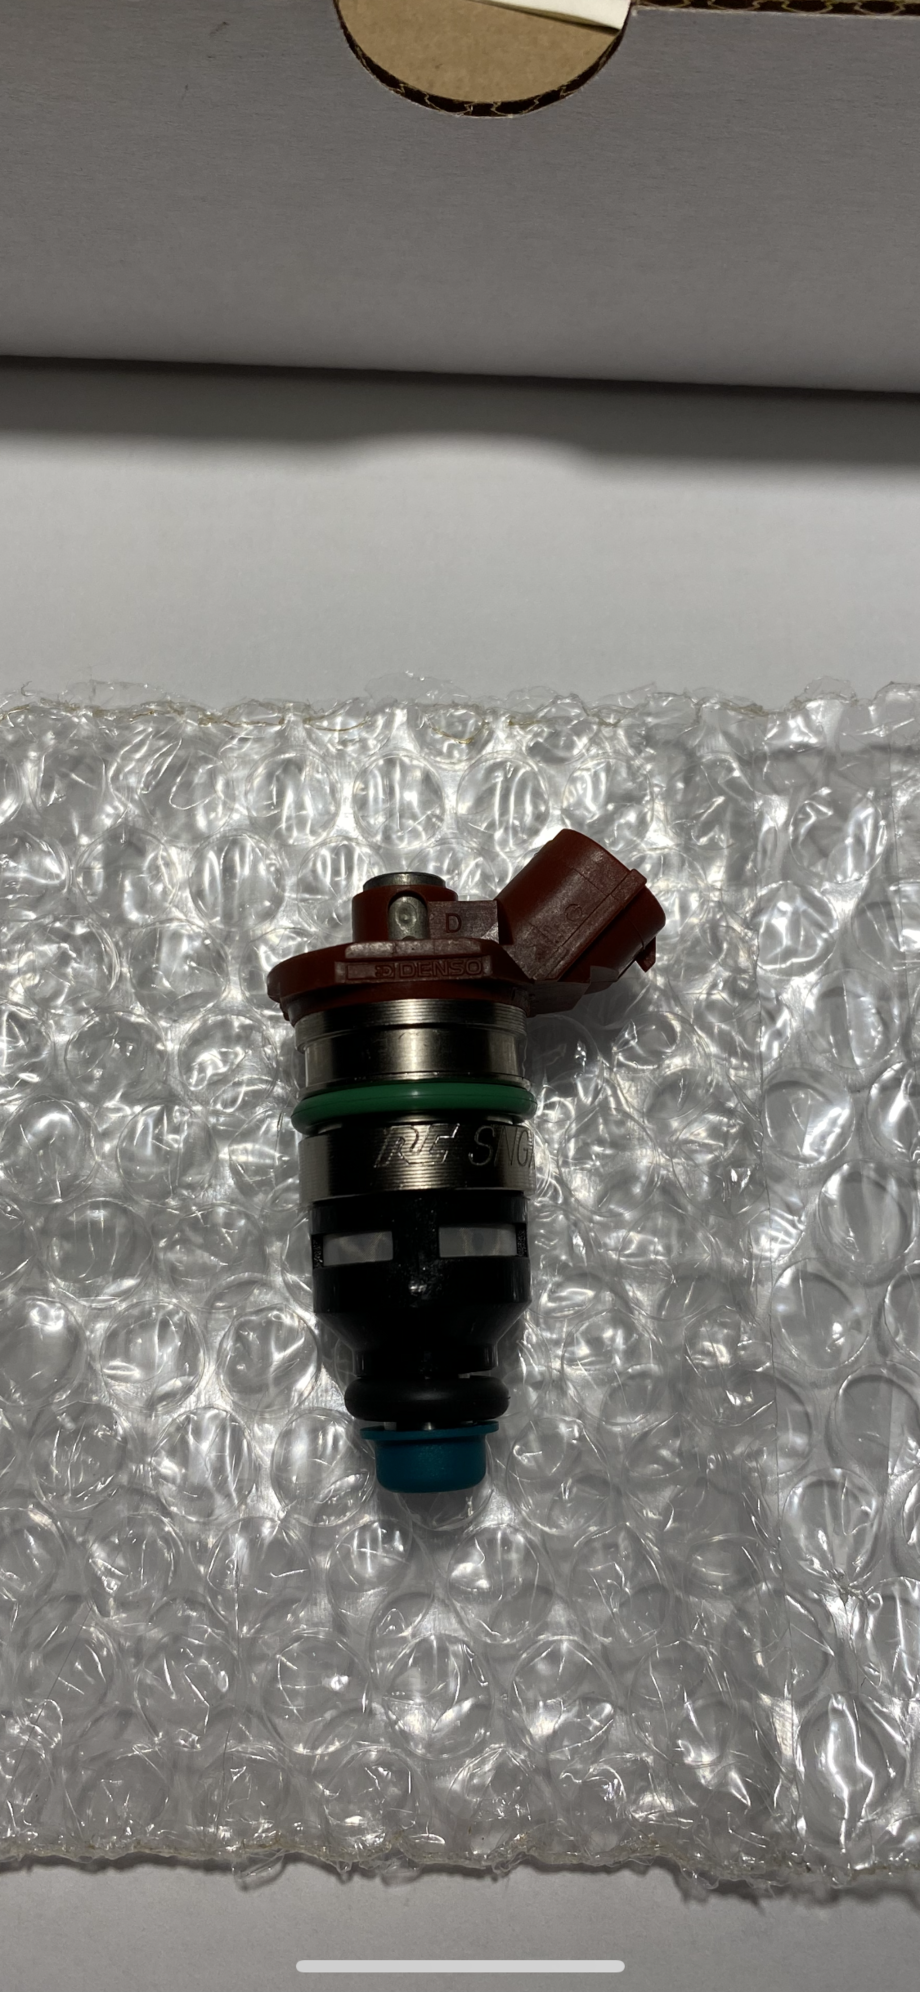 Engine - Intake/Fuel - Rc Engineering 1300cc secondary injectors - New - 1992 to 2002 Mazda RX-7 - Millersville, MD 21108, United States